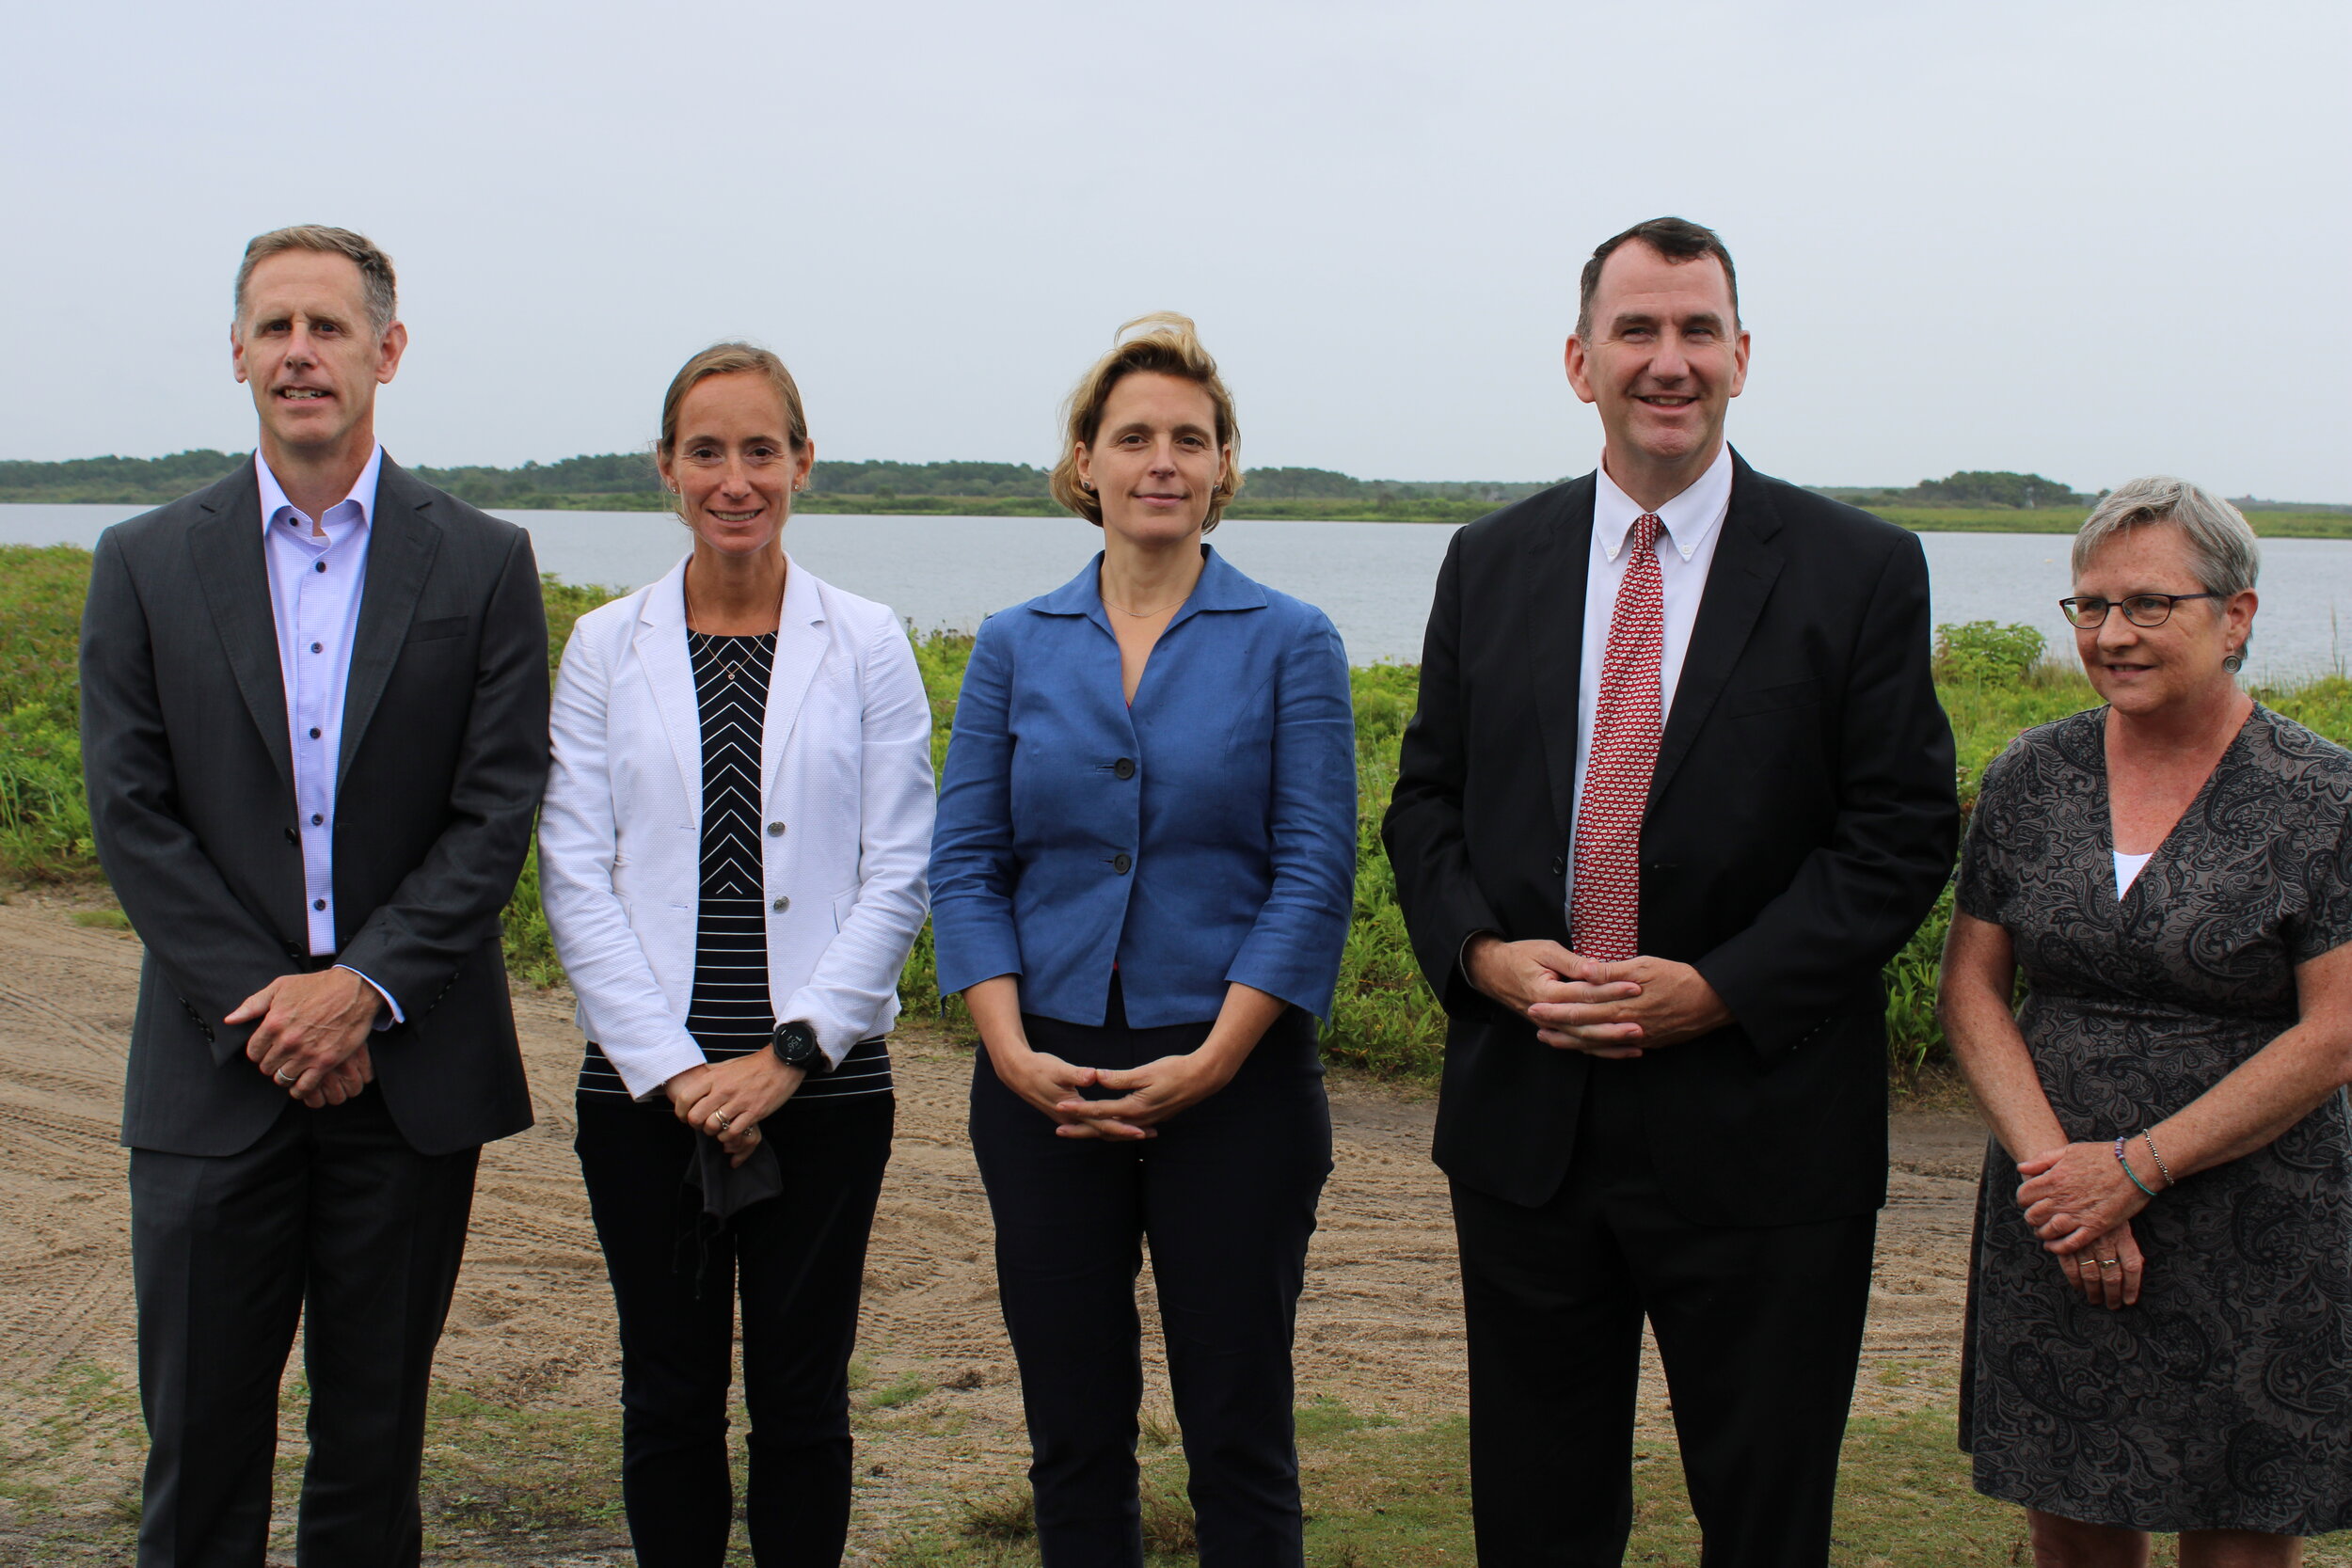  From left to right: Tom O’Shea, Trustees Managing Director of Resources and Planning; Lisa Berry Engler, Director of the Massachusetts Office of Coastal Zone Management (CZM); Jocelyn Forbush, Trustees Acting President &amp; CEO; James Cantwell, Sta